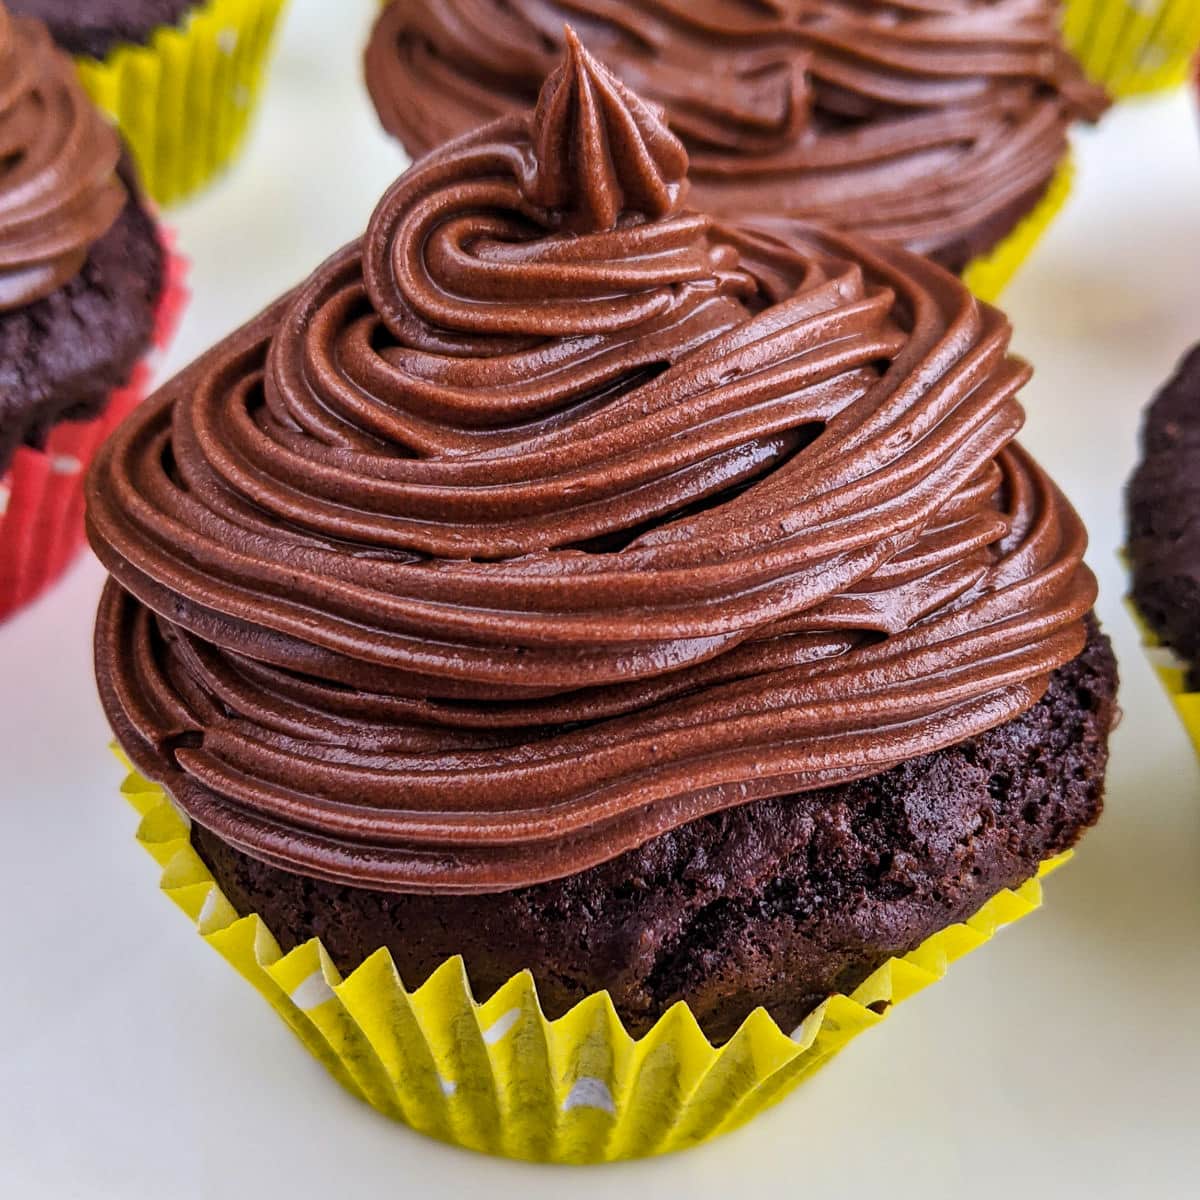 Close view of a delicious chocolate cupcake in air fryer.